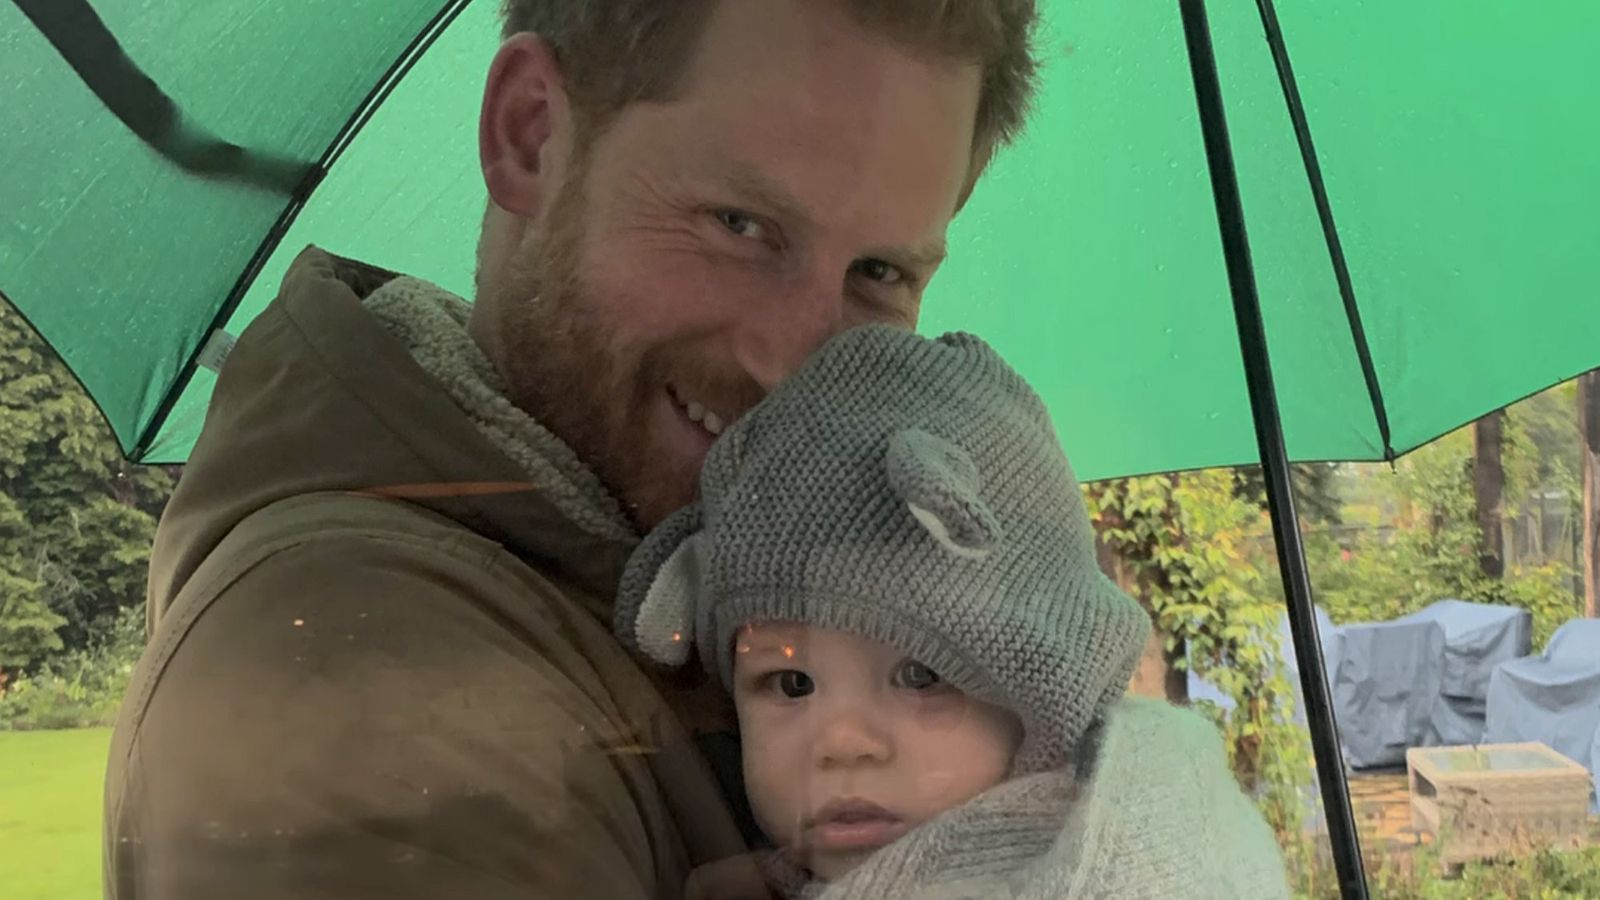 Unseen Photos of Archie and Lilibet From 'Harry & Meghan' Docuseries